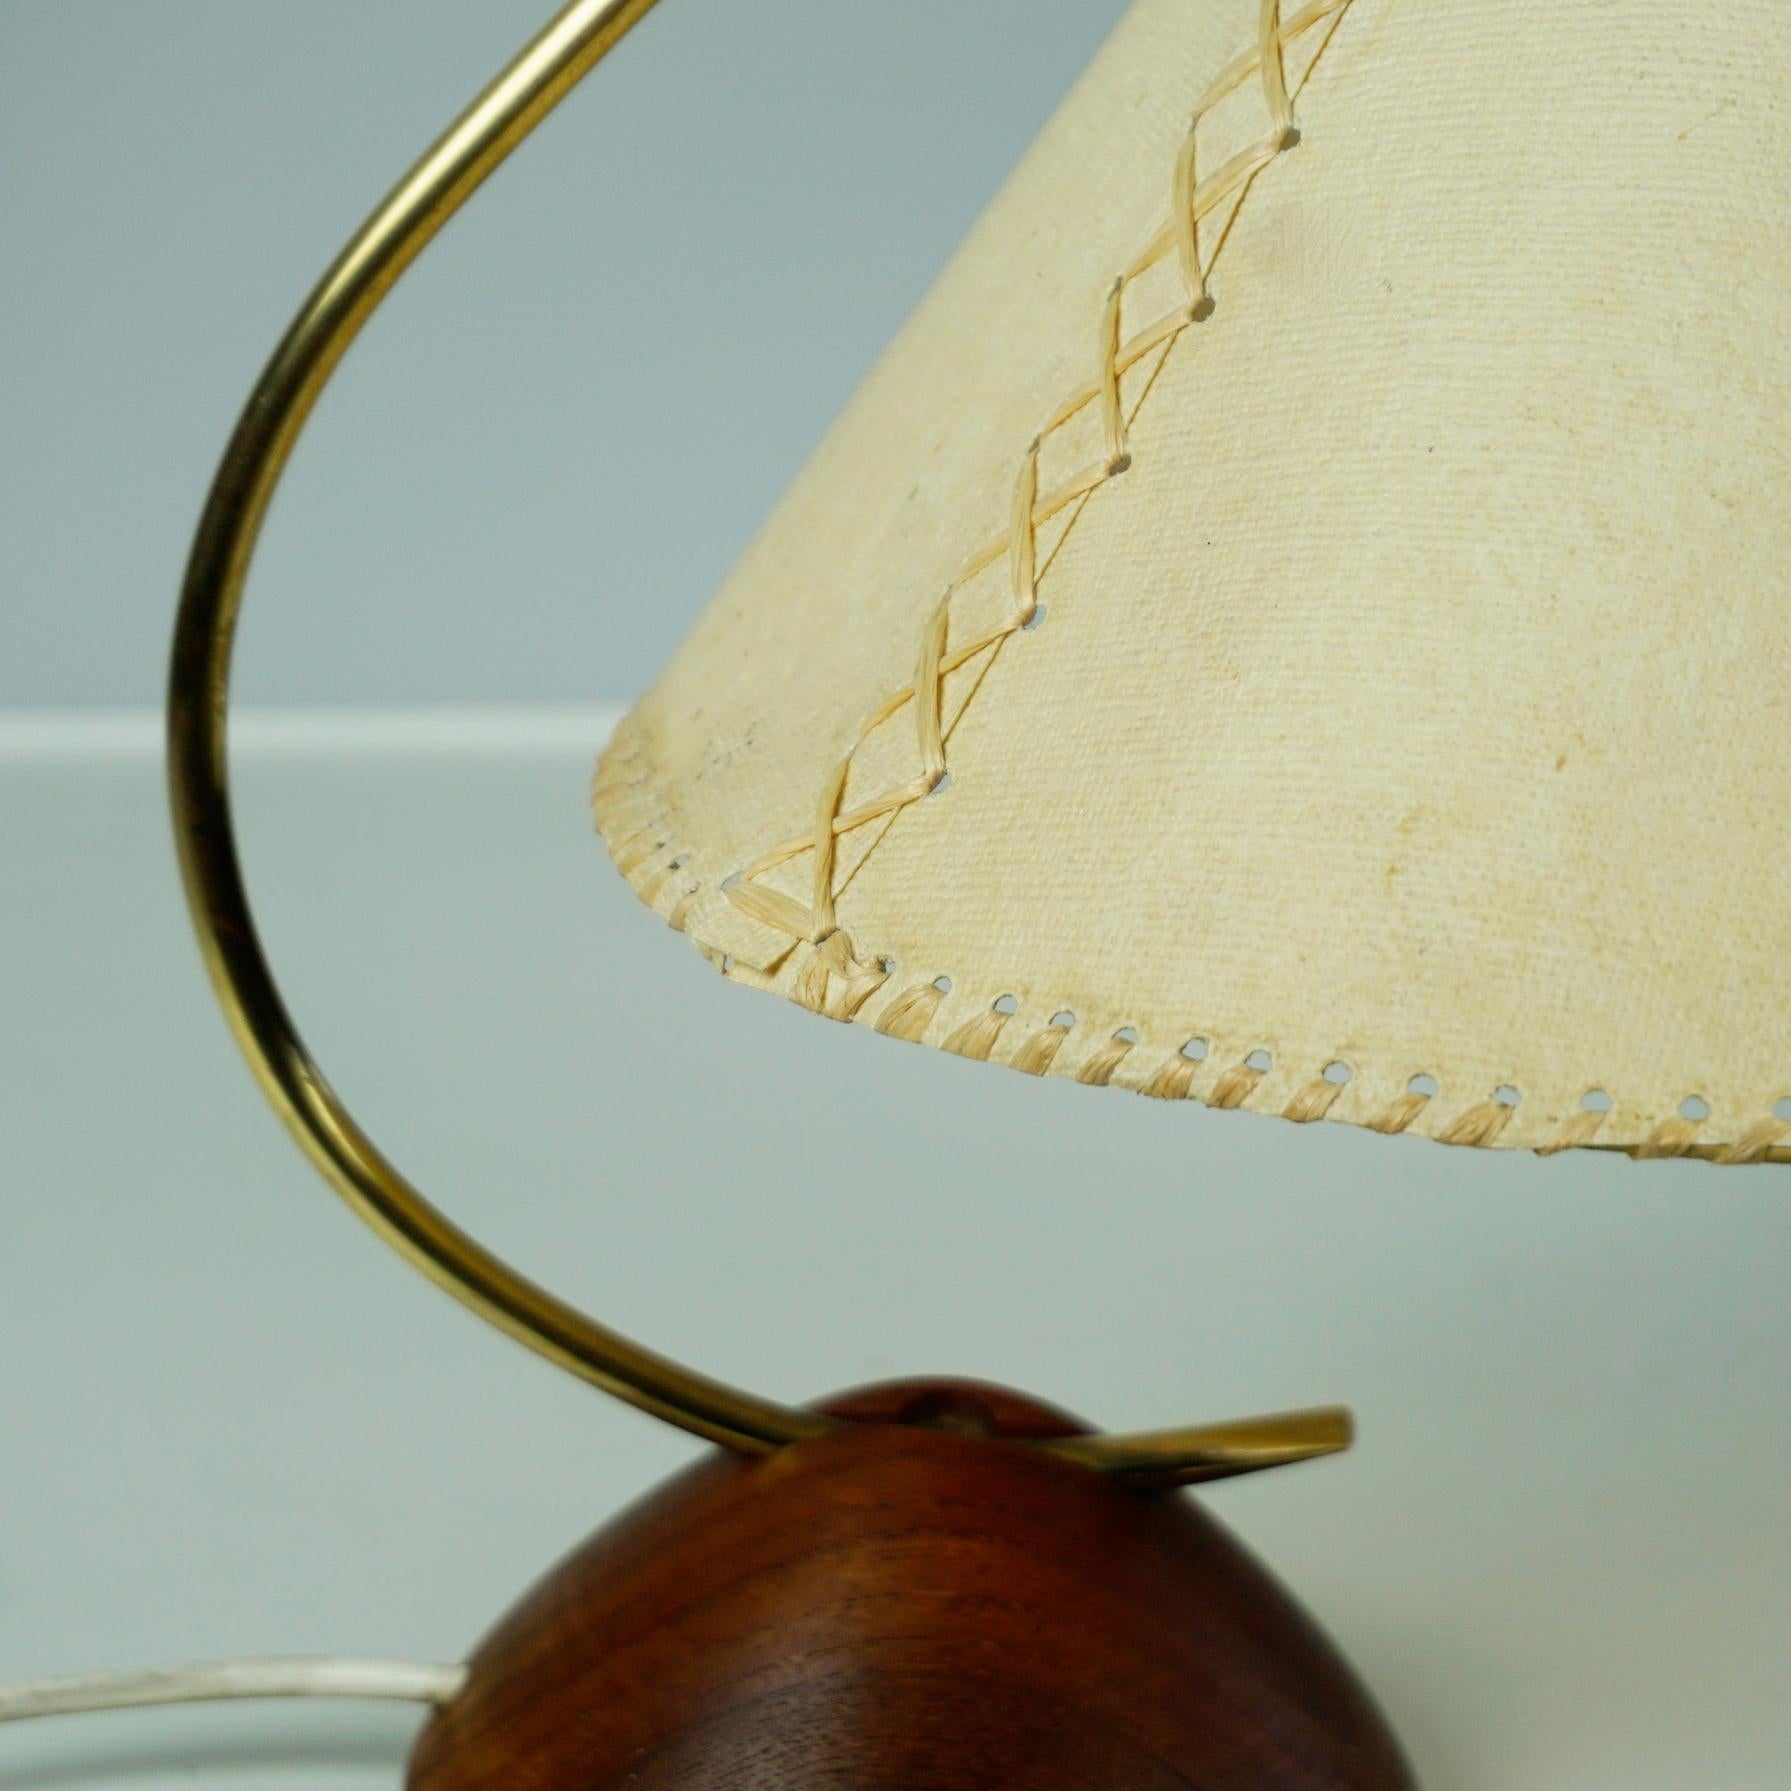 Scandinavian Modern Teak and Brass Table Lamp with Original Paper Shade For Sale 7